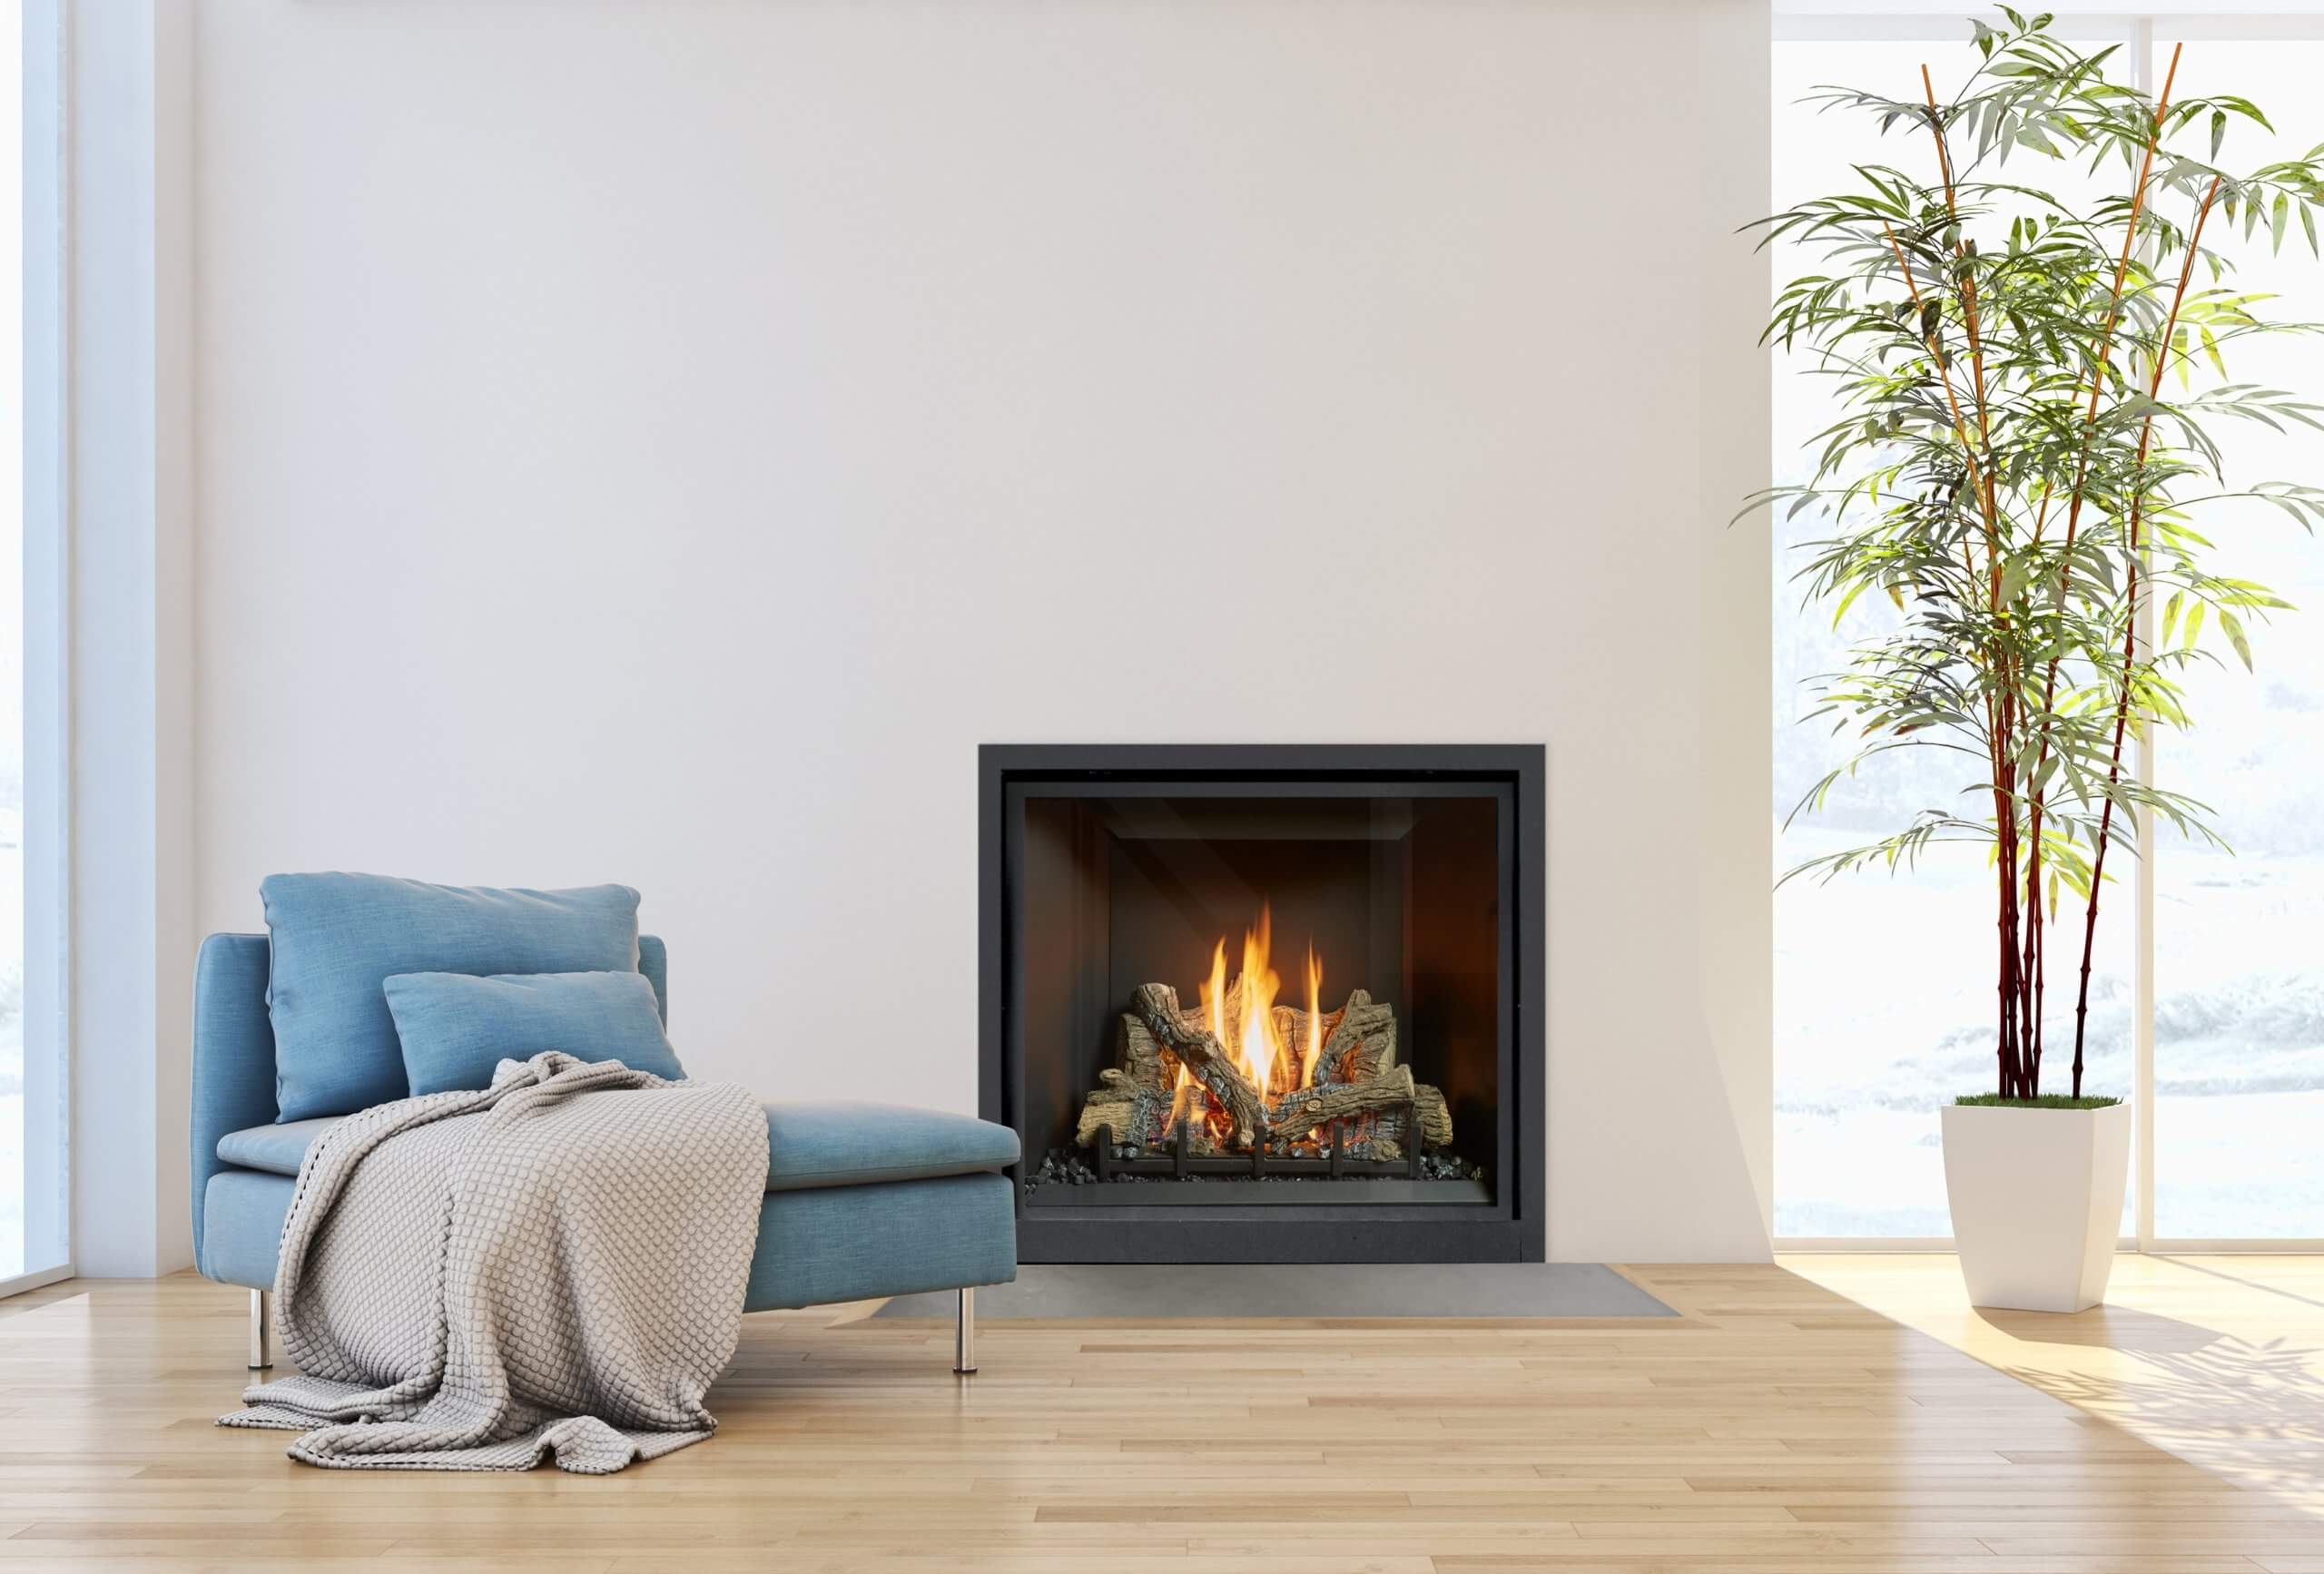 Clean face gas fireplace probuilder 36 by Fireplace Xtrordinair in a light room next to a blue arm chair